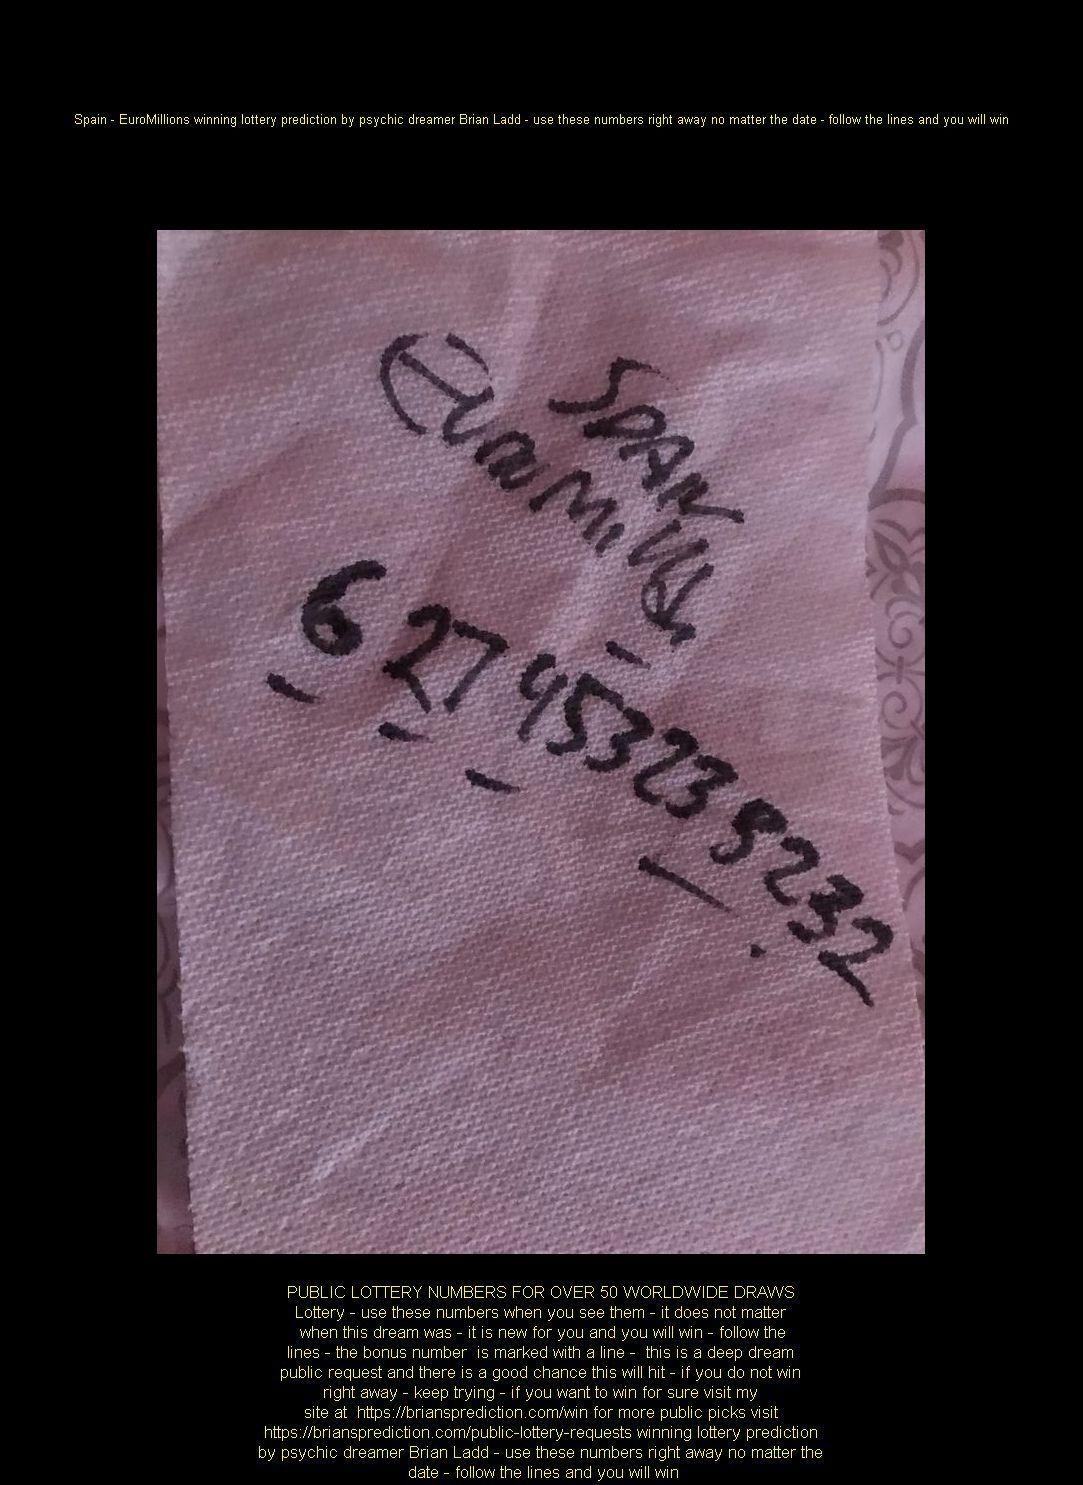 Spain - EuroMillions winning lottery prediction by psychic dreamer Brian Ladd - use these numbers right away no matter the date - follow the lines and you will win
Want me to fill out your lottery pick sheet?  visit  https://briansprediction.com/picks-by-mail.php
